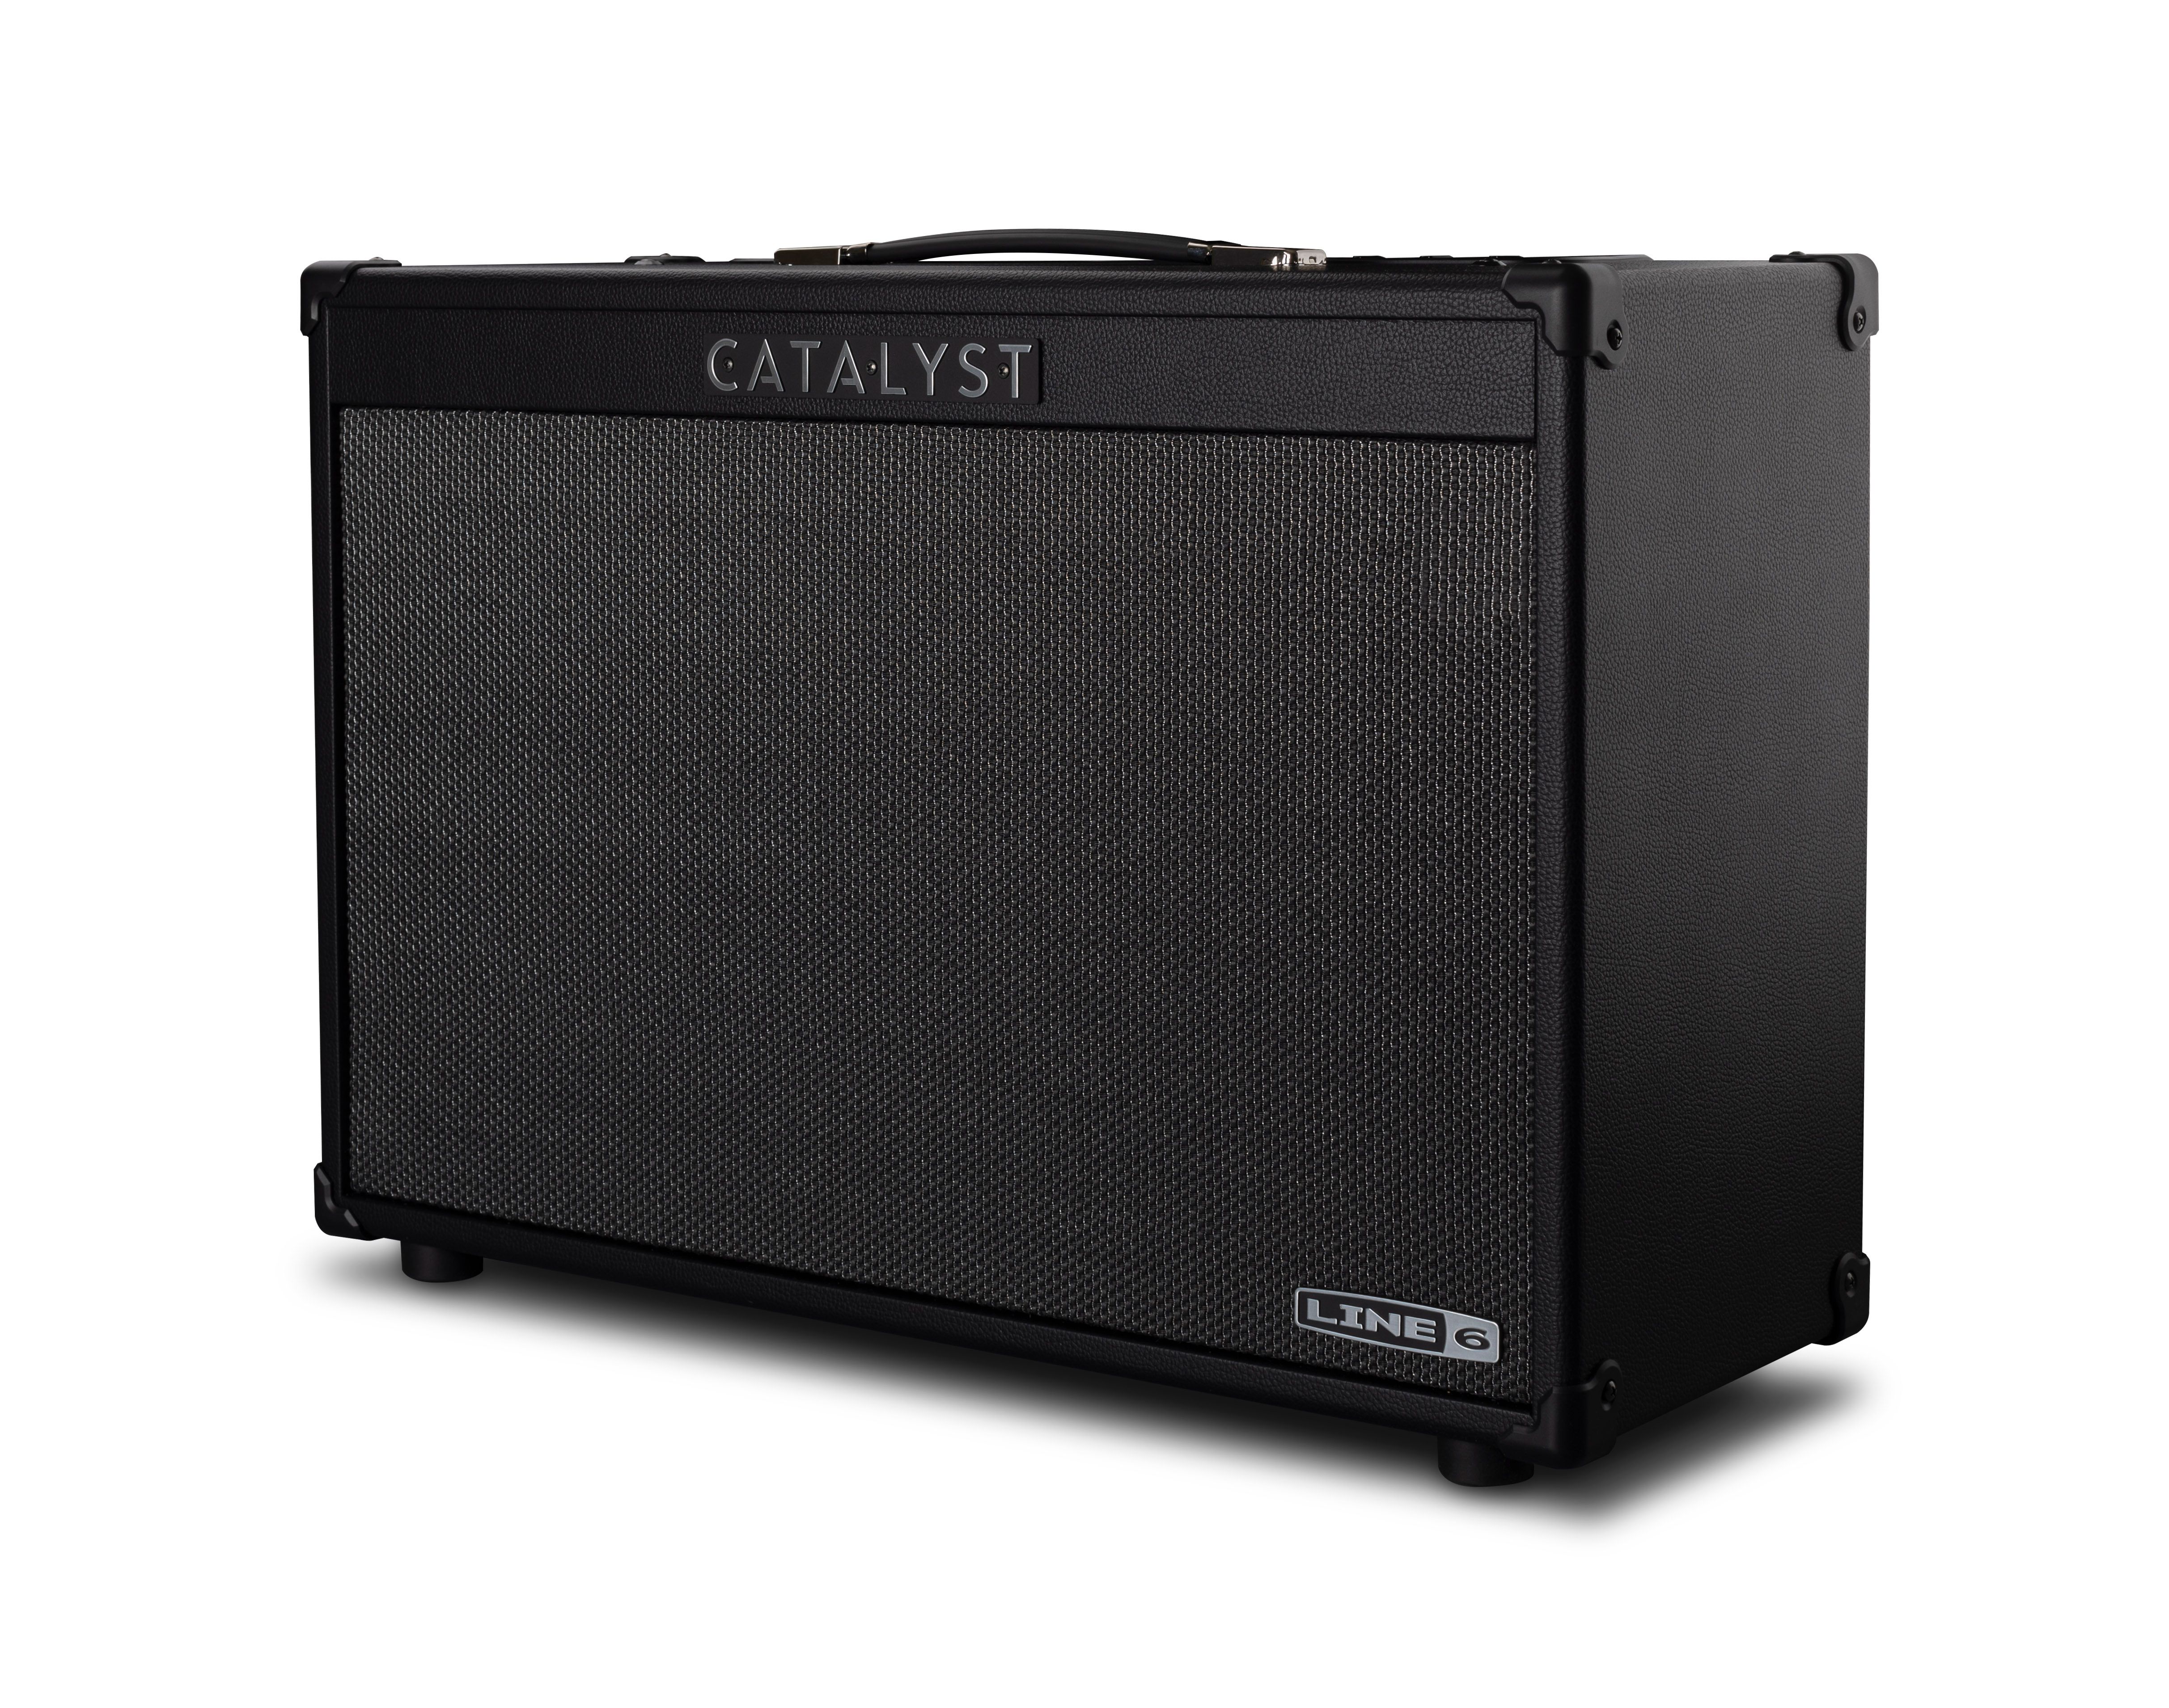 Line 6 Catalyst Combo 200w 2x12 - Electric guitar combo amp - Variation 1